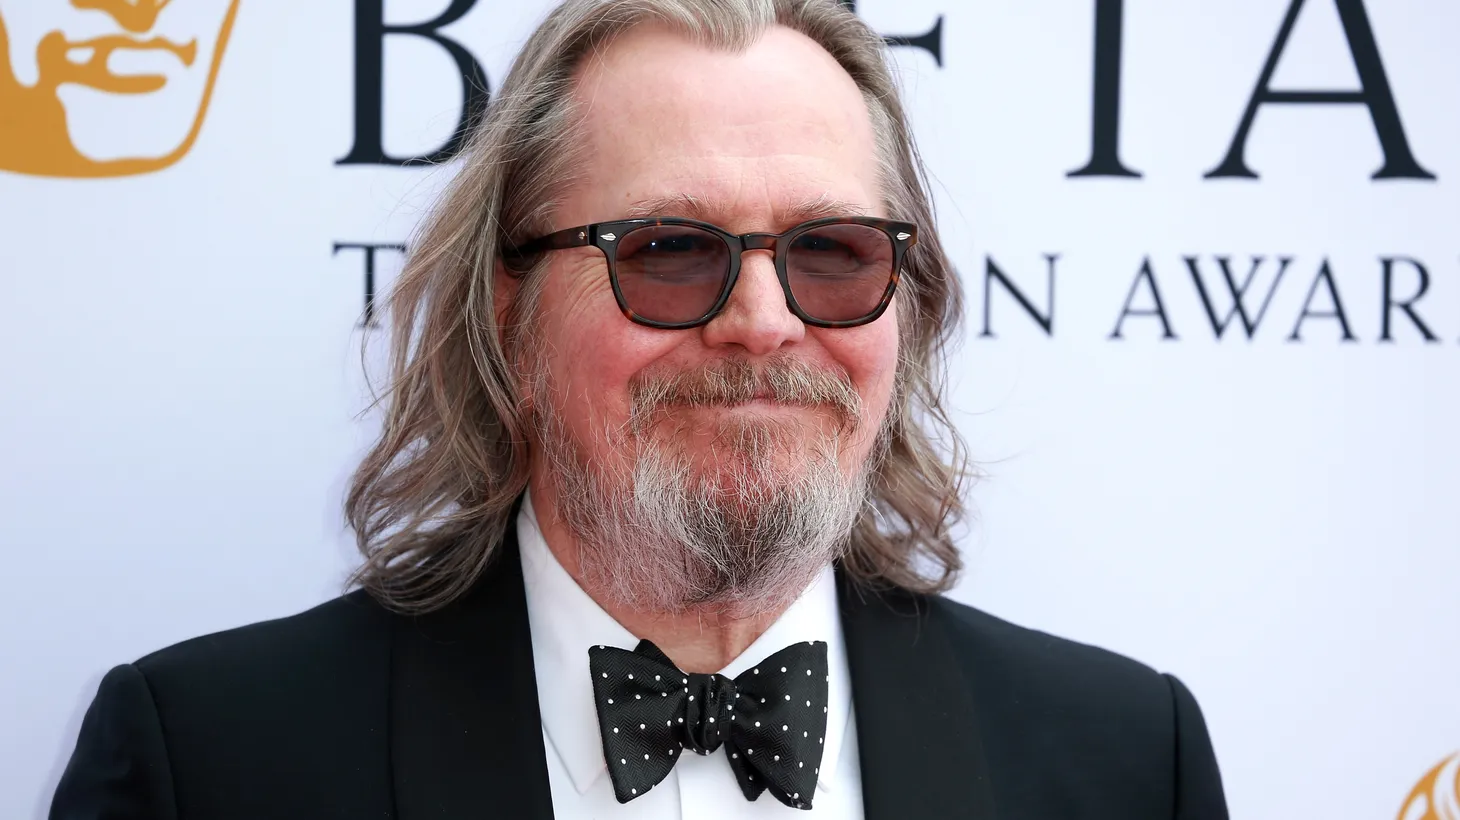 Gary Oldman attends the BAFTA TV Awards at the Royal Festival Hall in London, England on May 14, 2023.